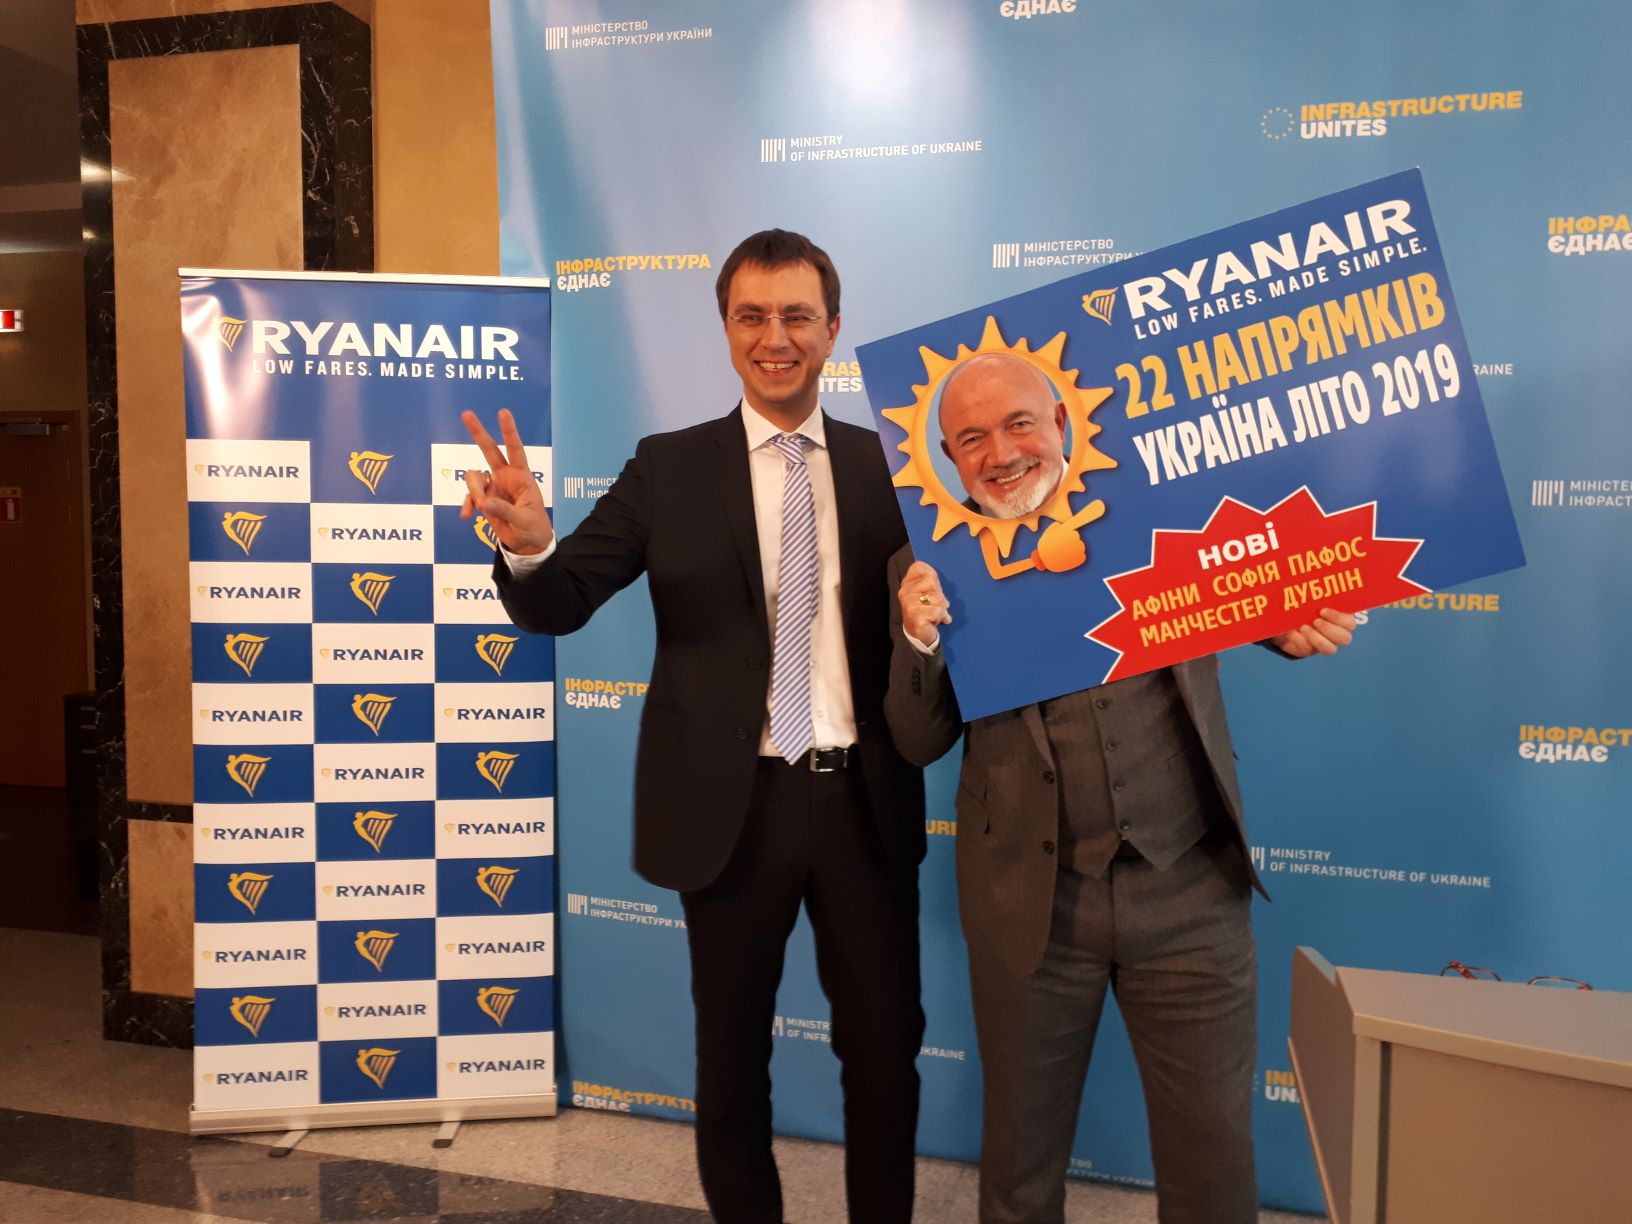 Ryanair Launches New Manchester Route To Kyiv